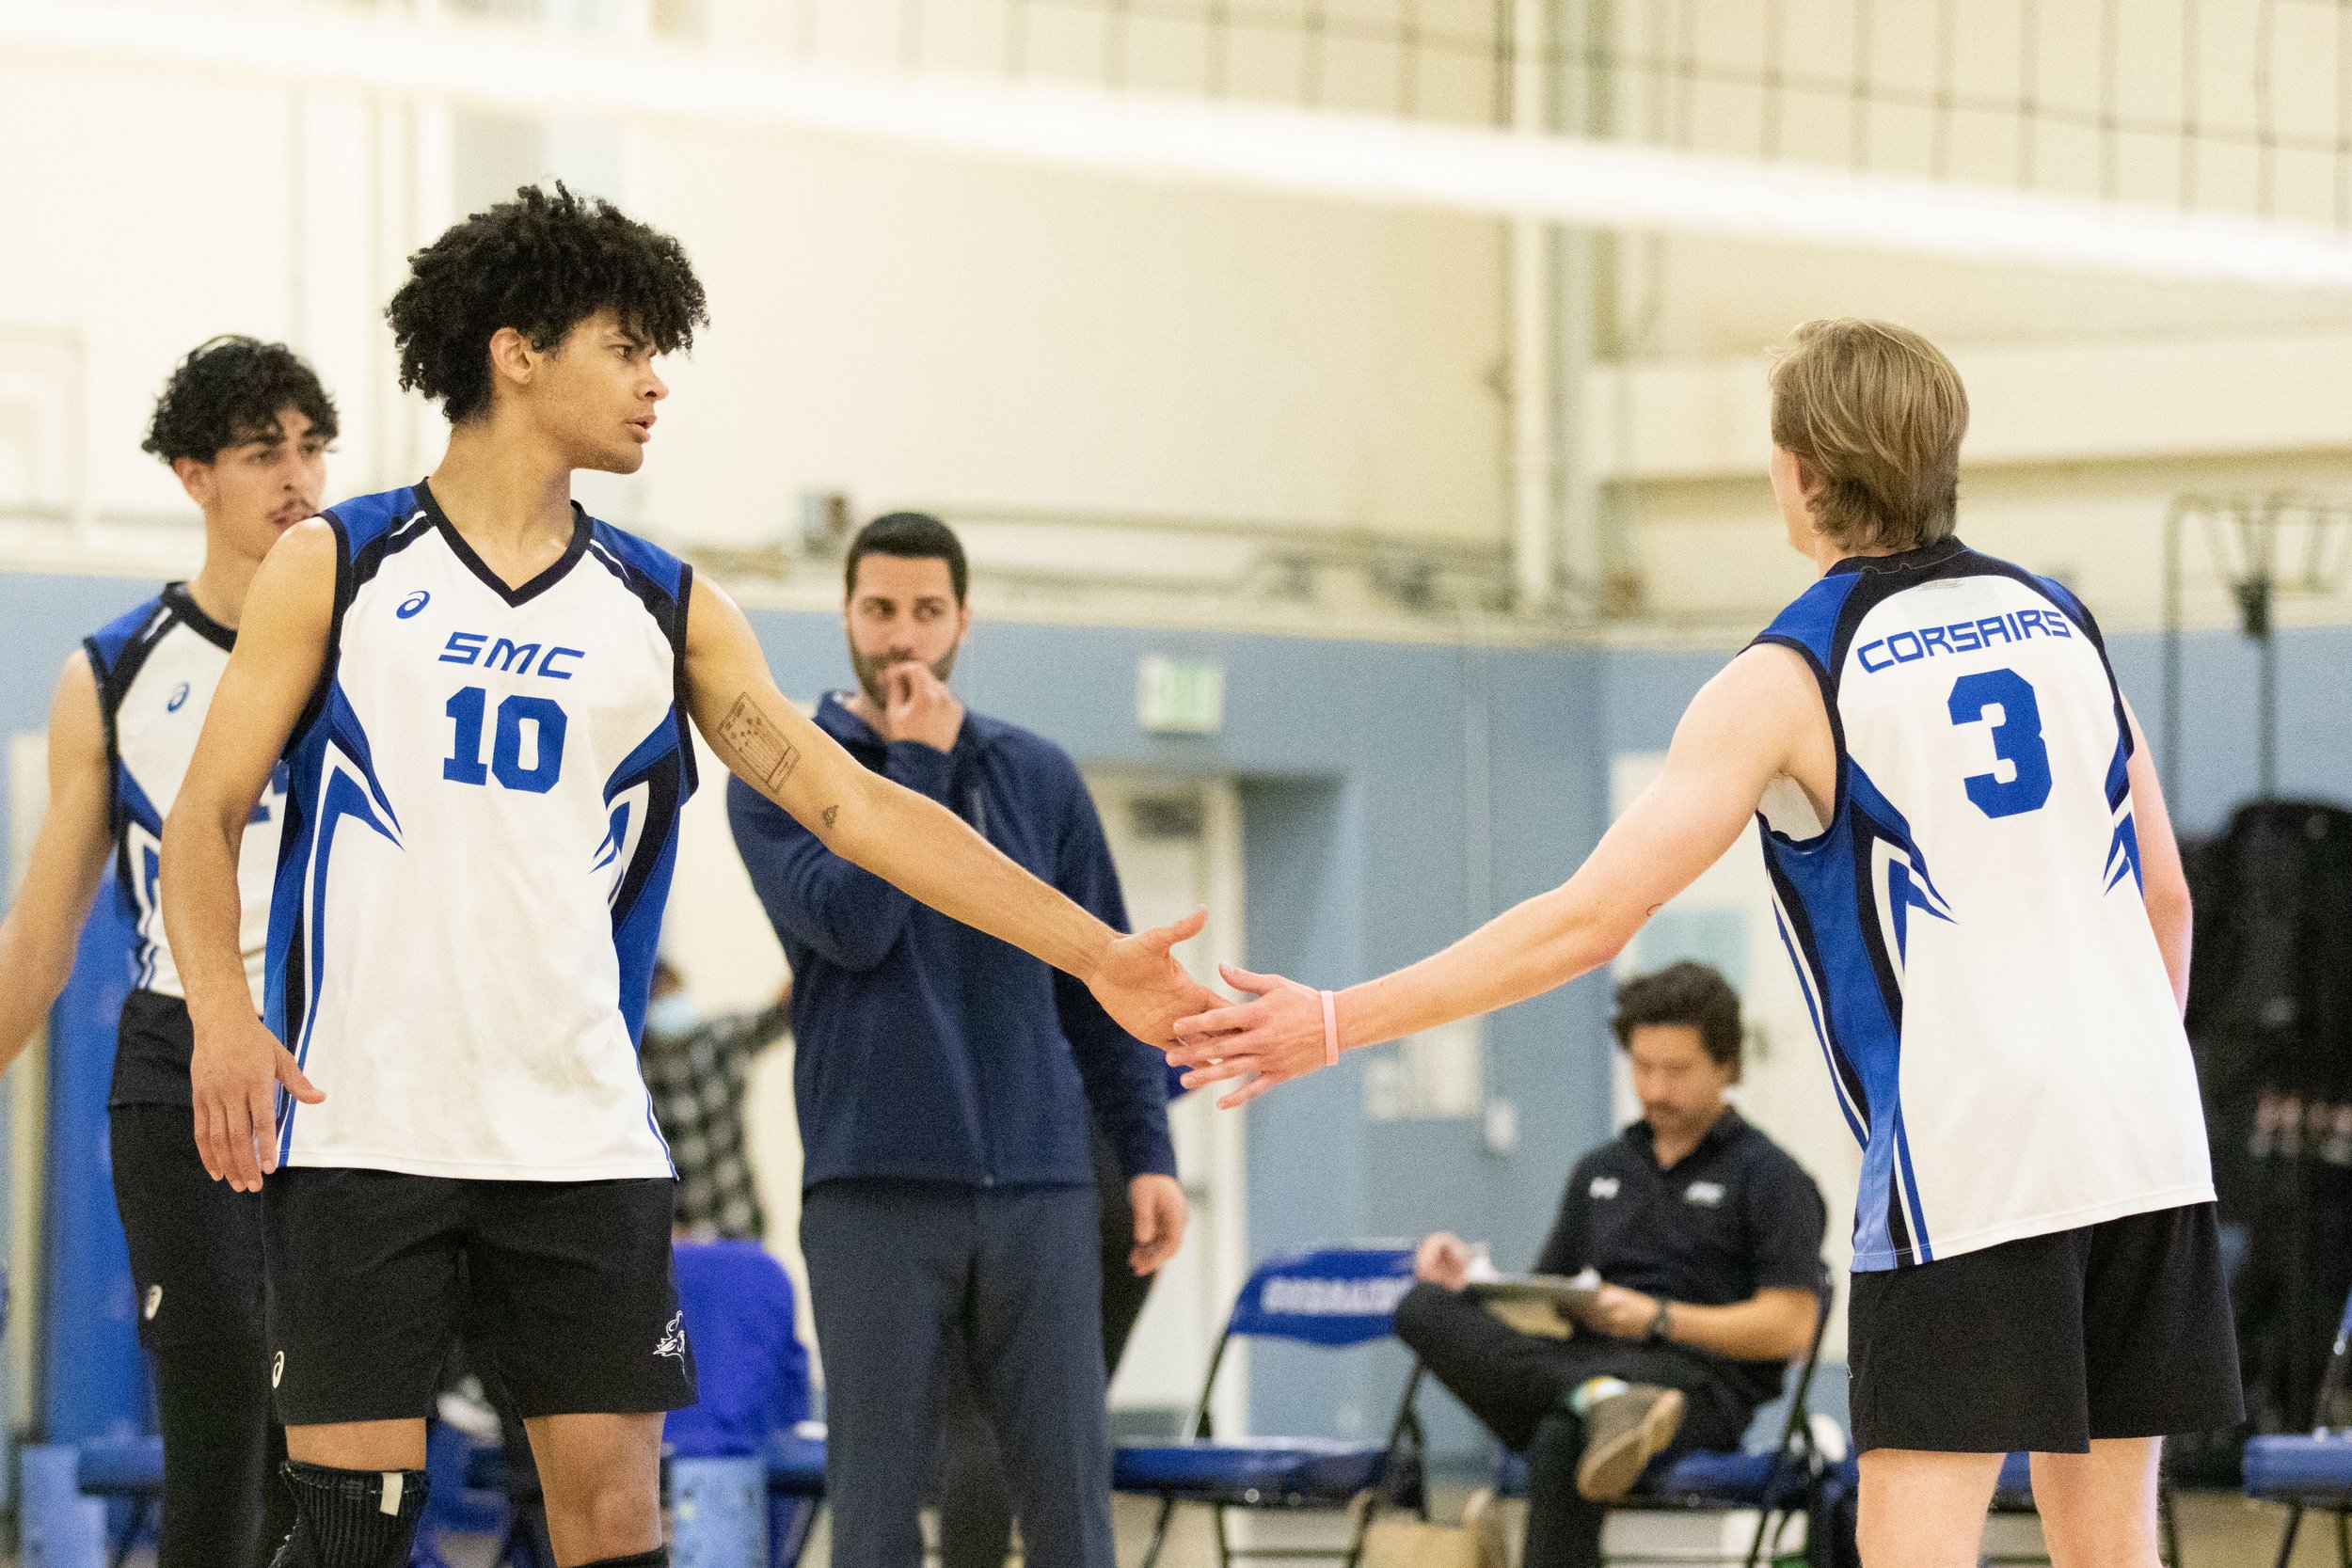  Santa Monica College Corsair outside hitter Nate Davis (10, left) and setter Camden Higbee (3, right) celebrating scoring a point during the first set of a home game in Santa Monica, Calif., on Friday, March 3, 2023. The game resulted in the Corsair